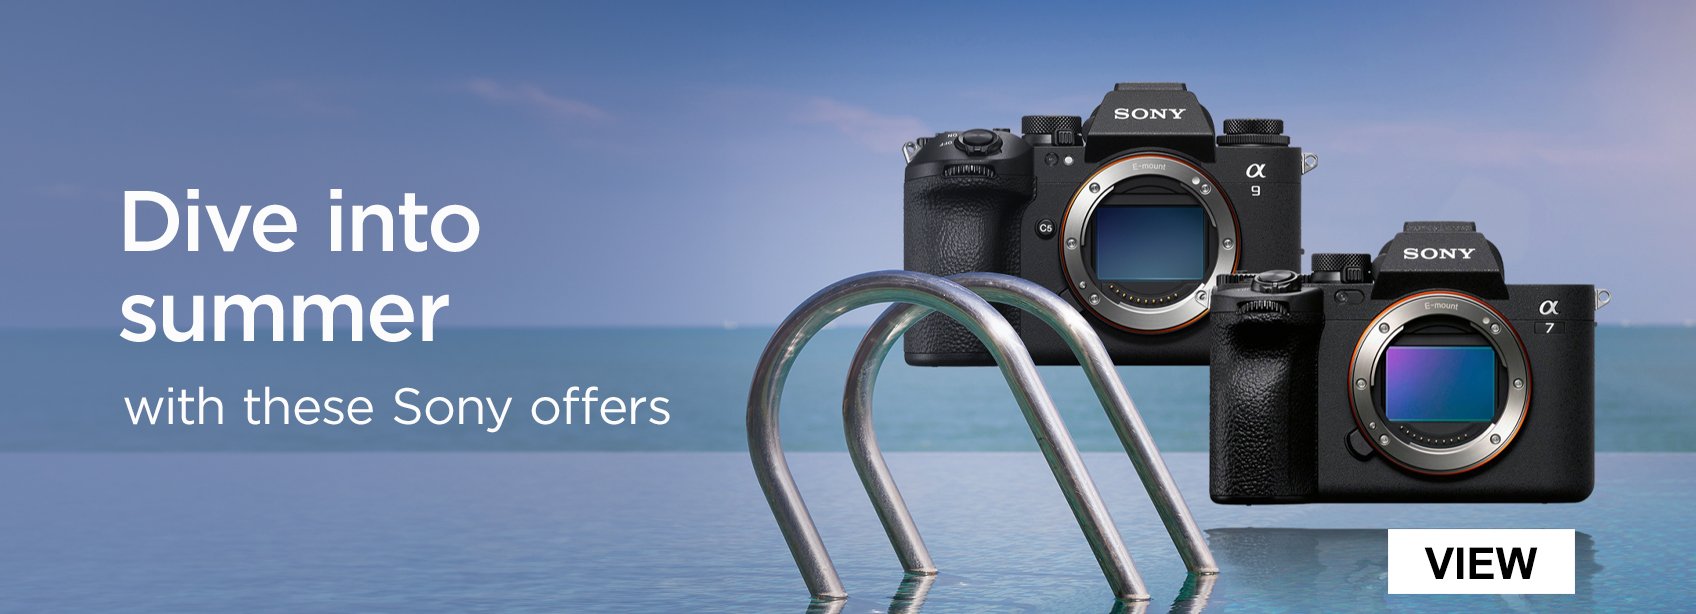 Dive into summer with these Sony offers